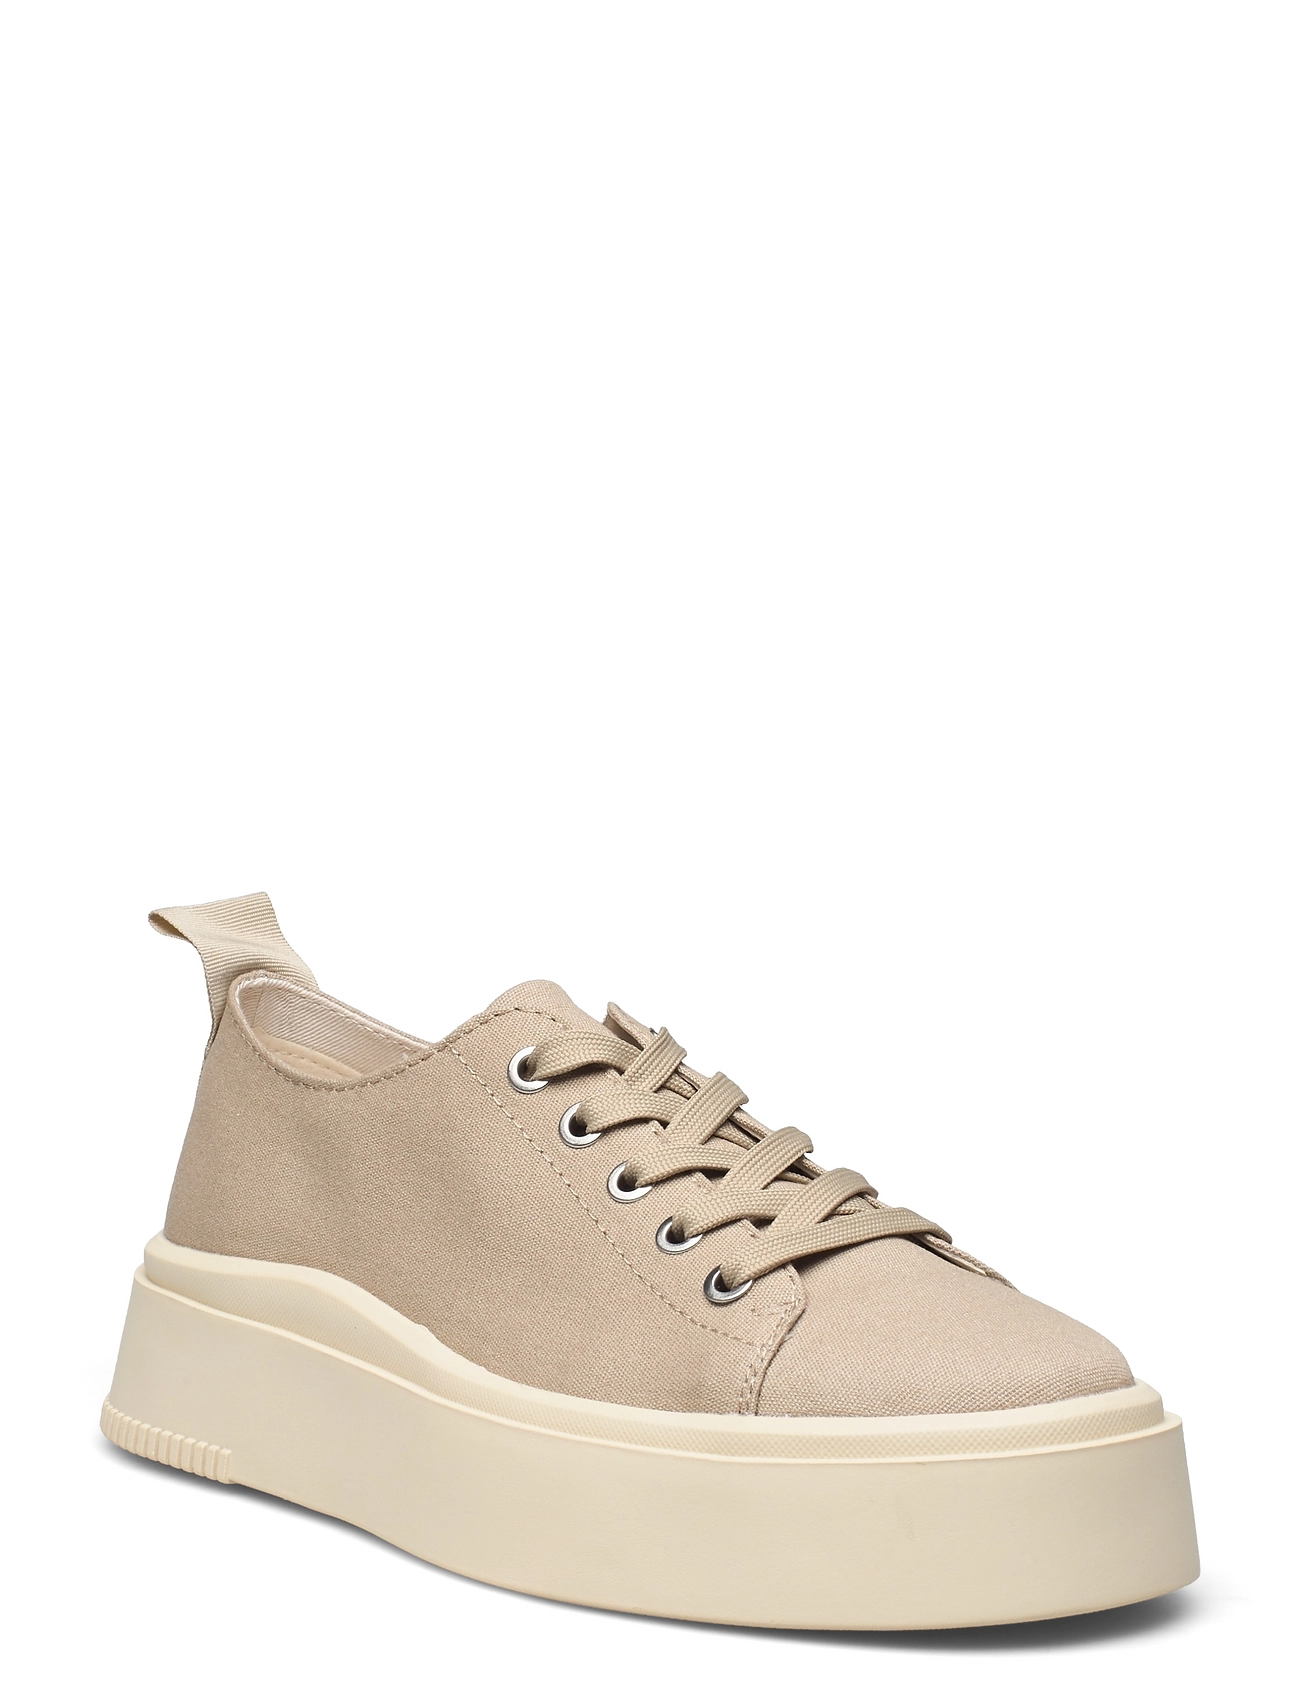 VAGABOND Stacy - Low top sneakers - Boozt.com